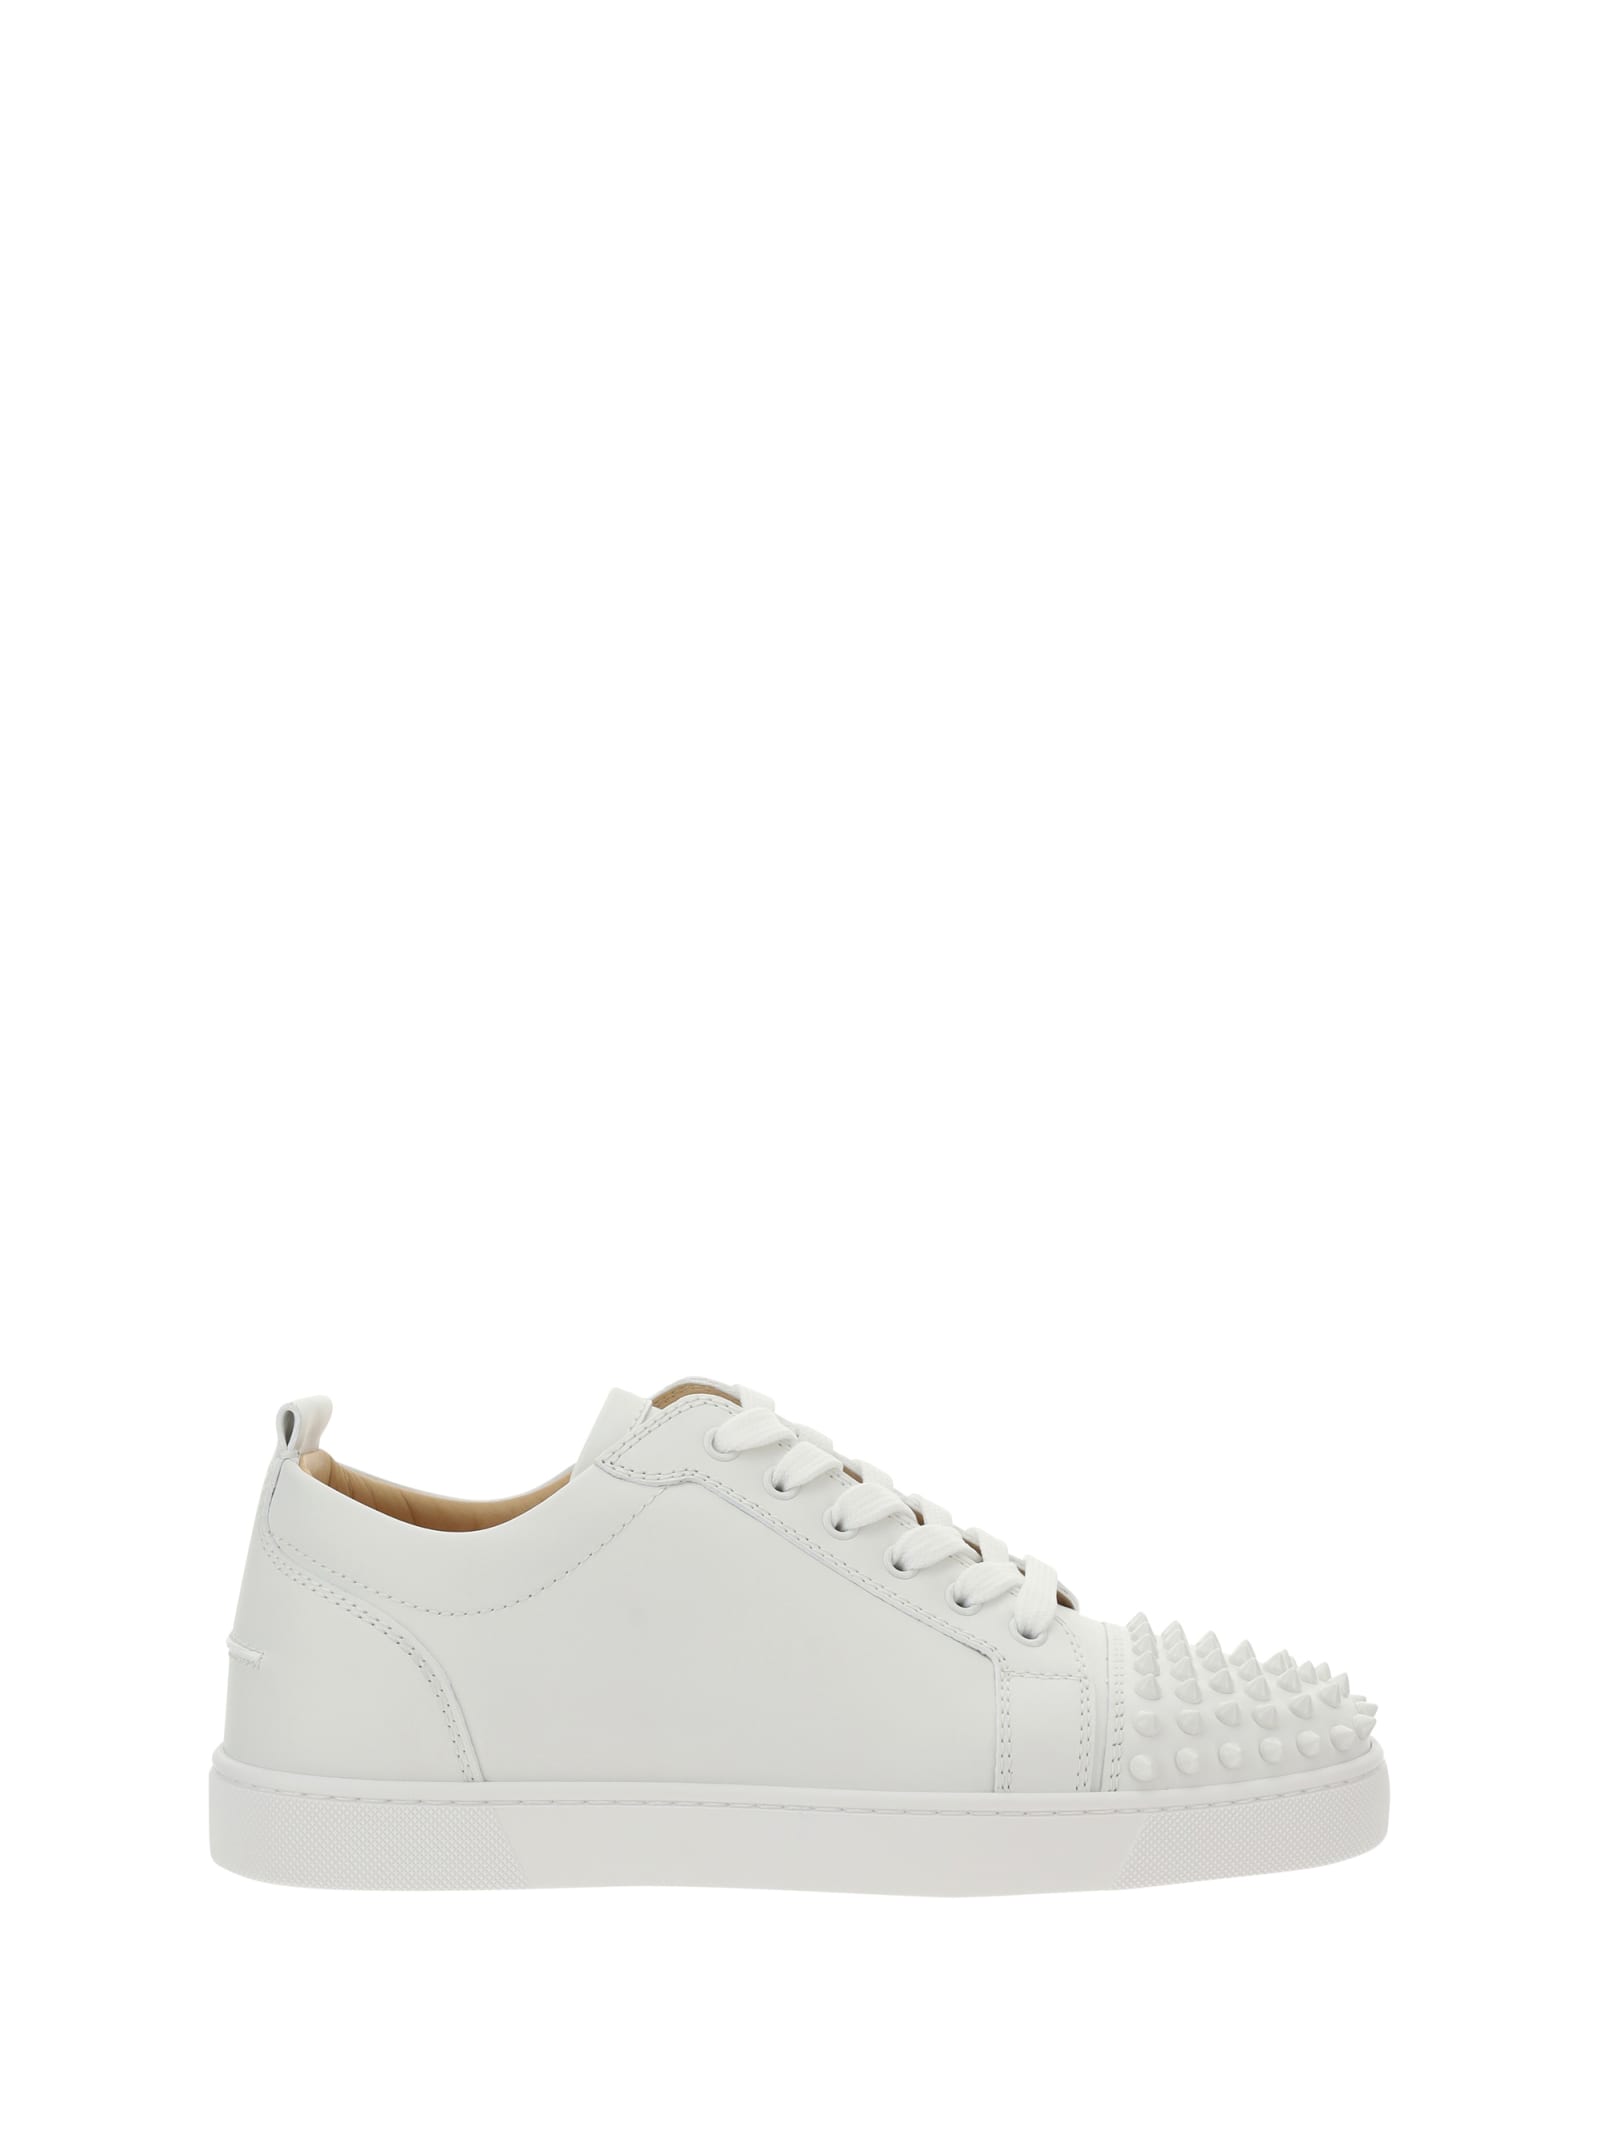 Christian Louboutin Louis Junior Spikes Trainers In White